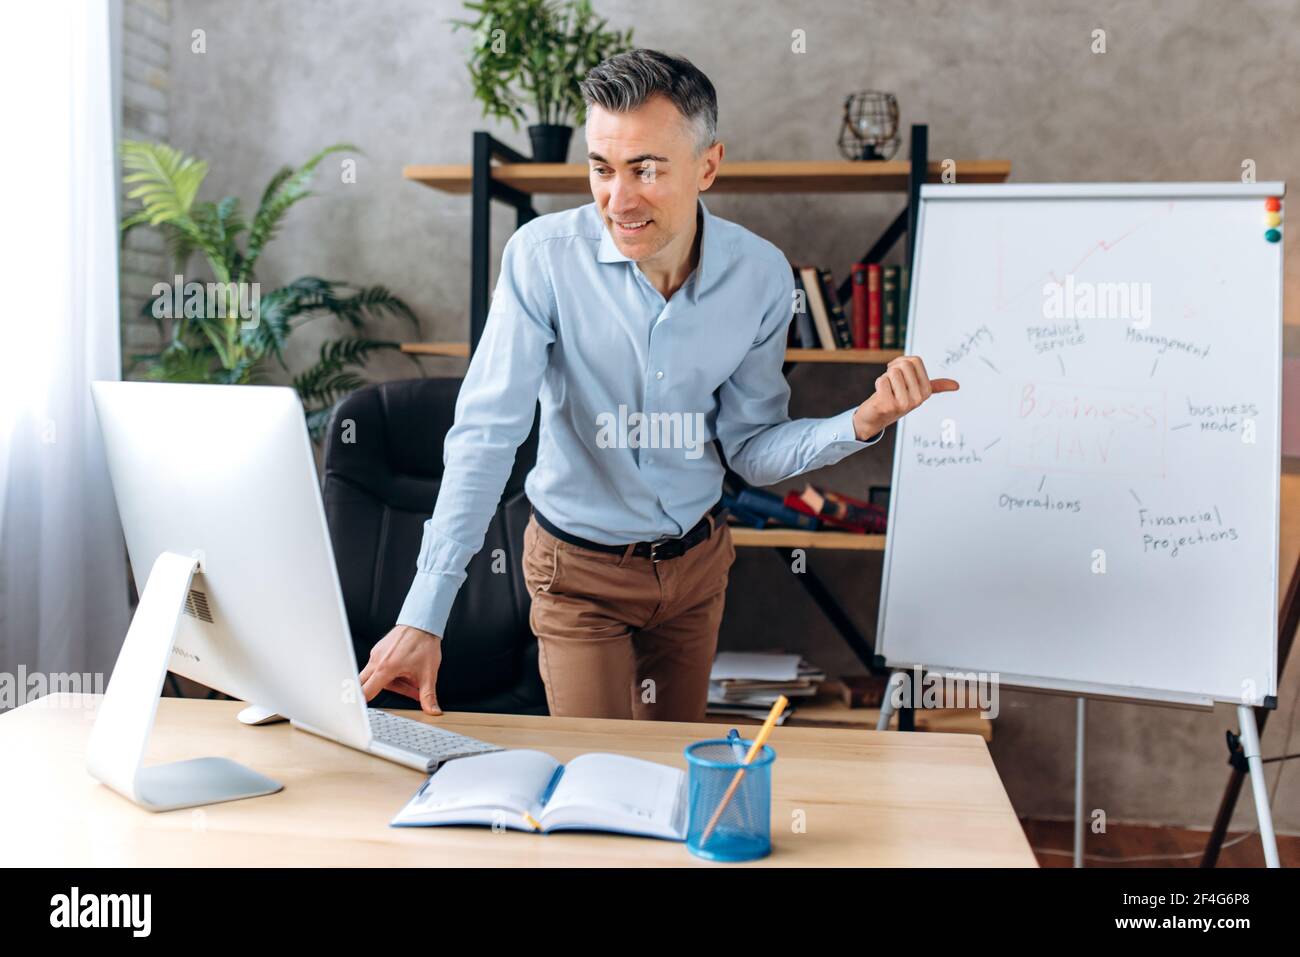 A successful confident adult businessman, the leader of the company conducts online business meeting for colleagues in office, gestures with hand, explain business strategy, shows on flipchart, smiles Stock Photo